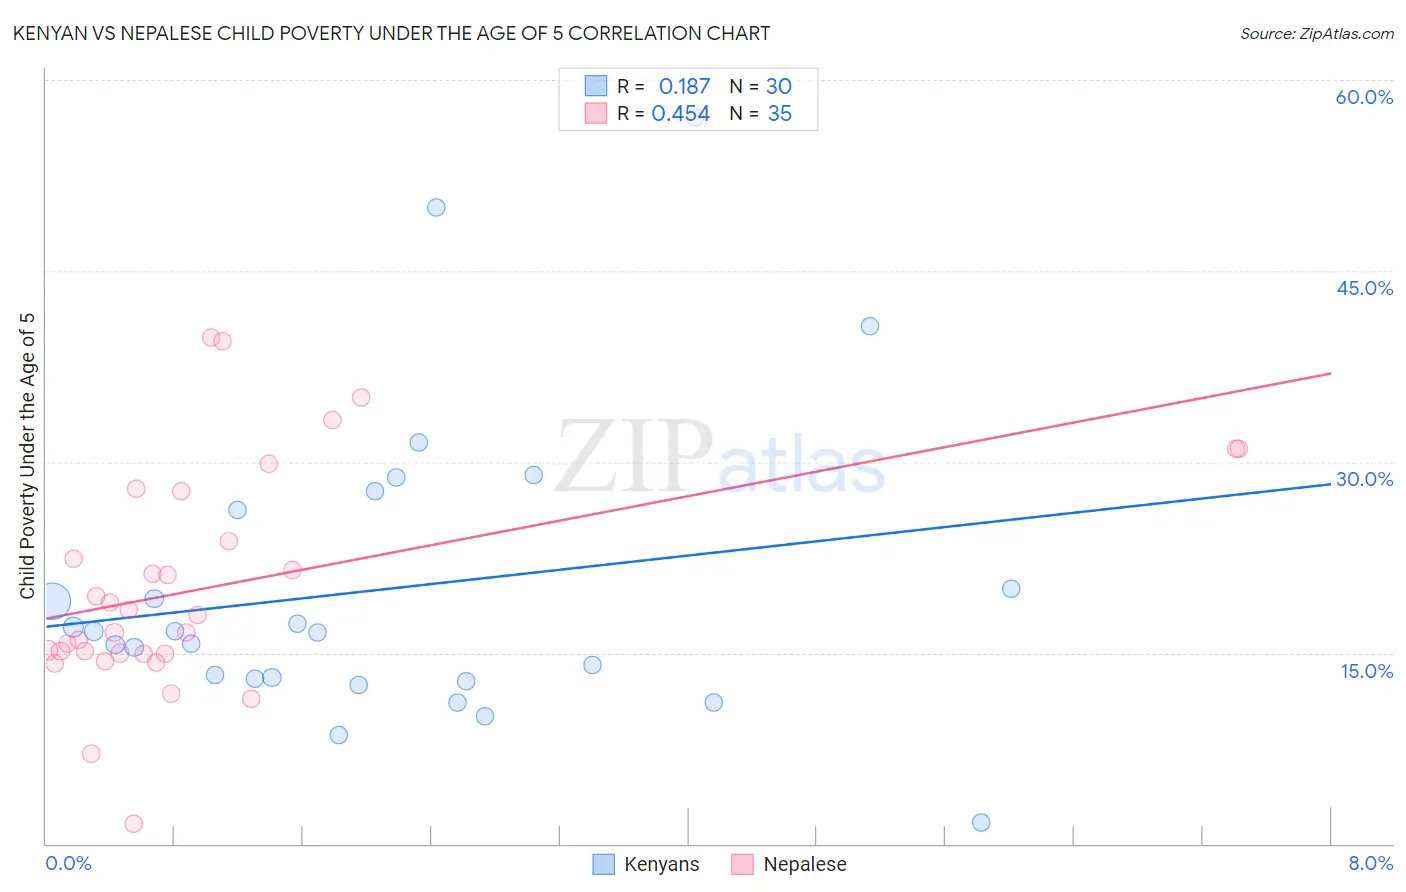 Kenyan vs Nepalese Child Poverty Under the Age of 5